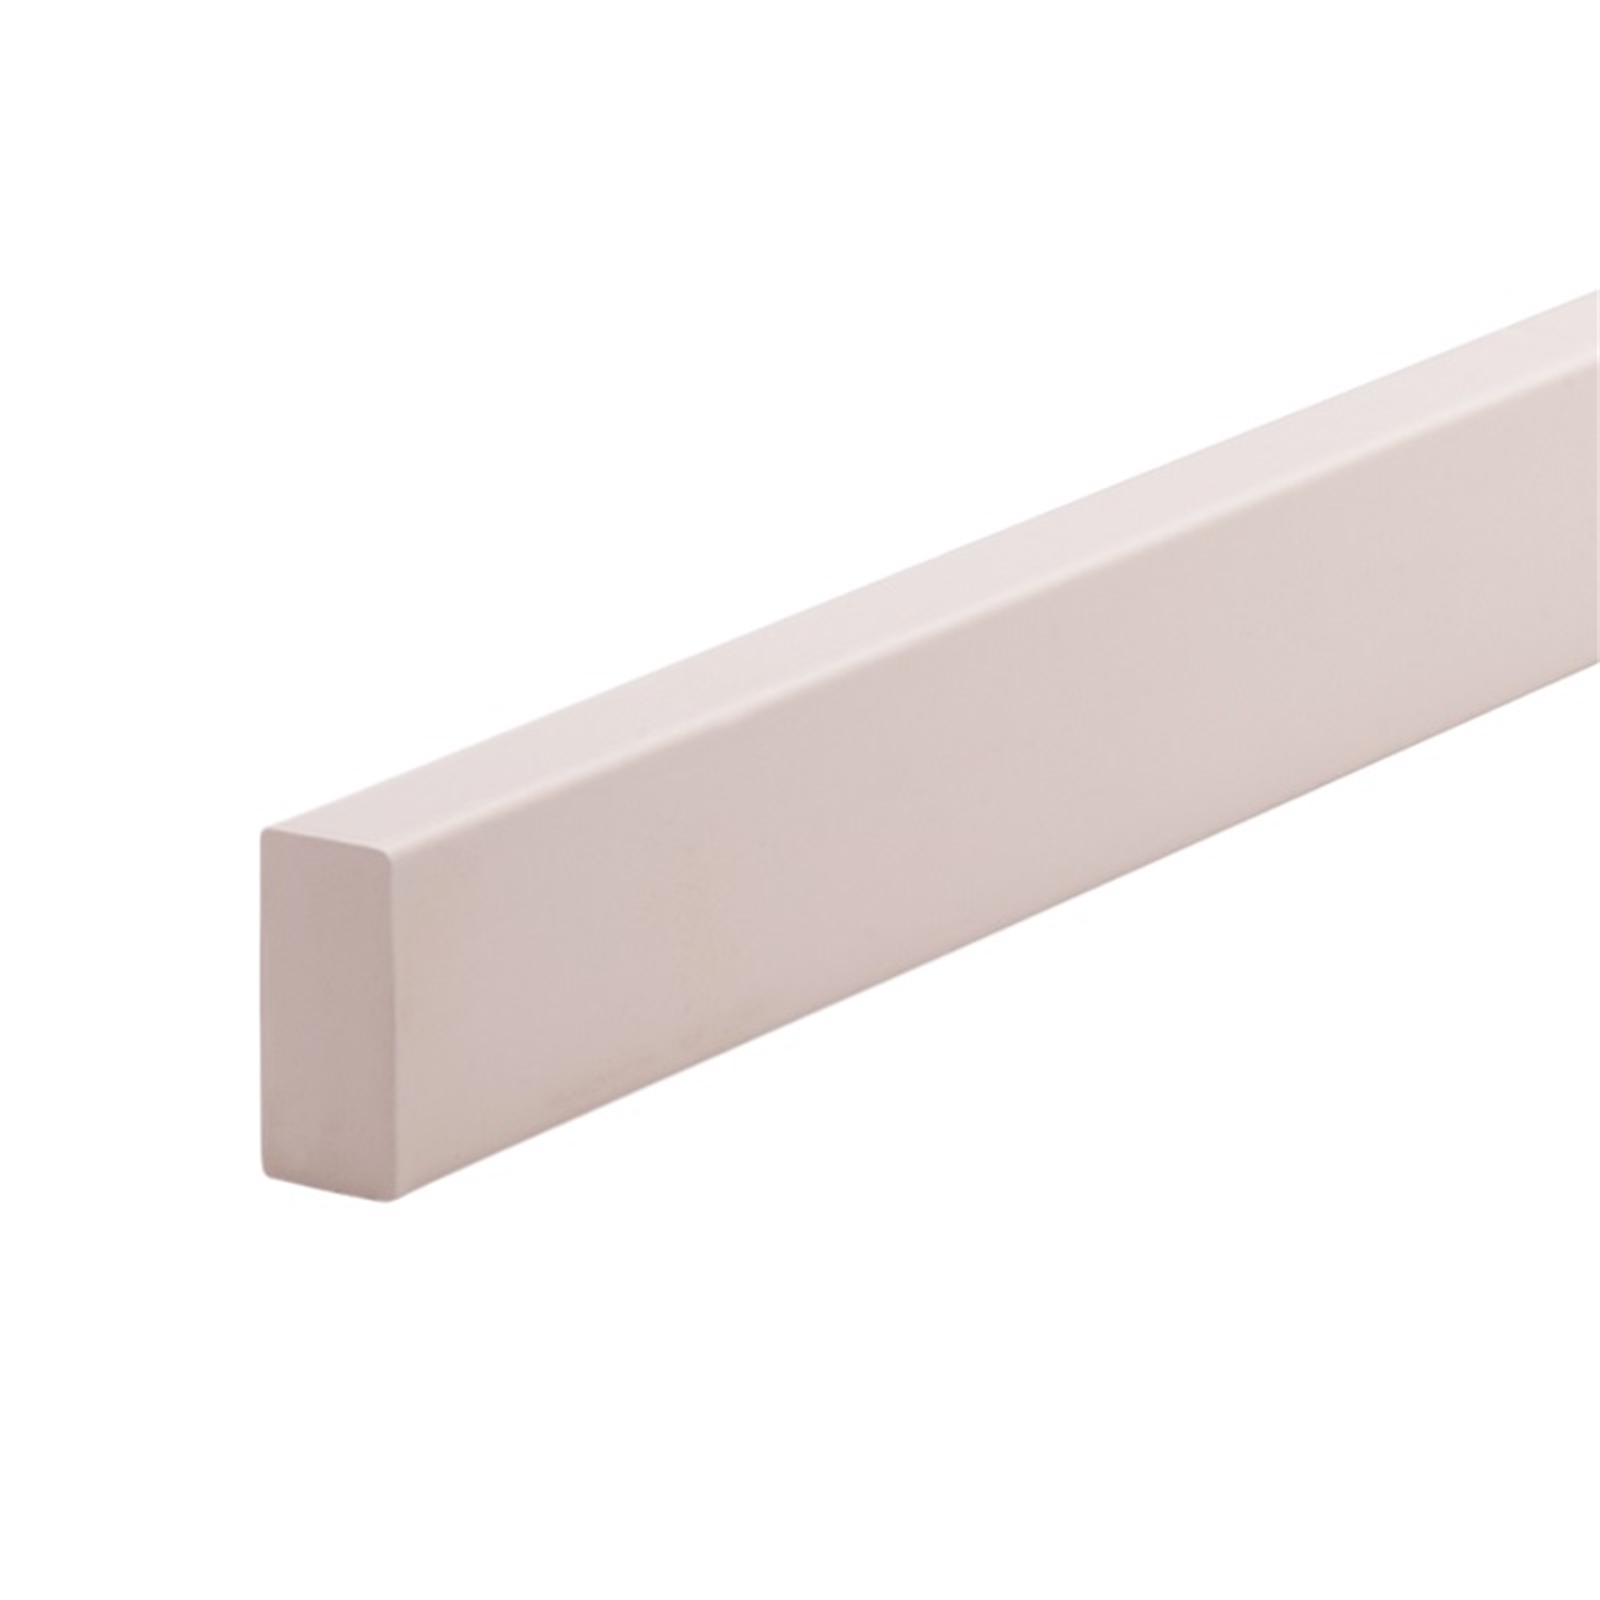 Woodhouse 42 x 18mm 5.4m H3 LOSP Finger Jointed Primed Pine